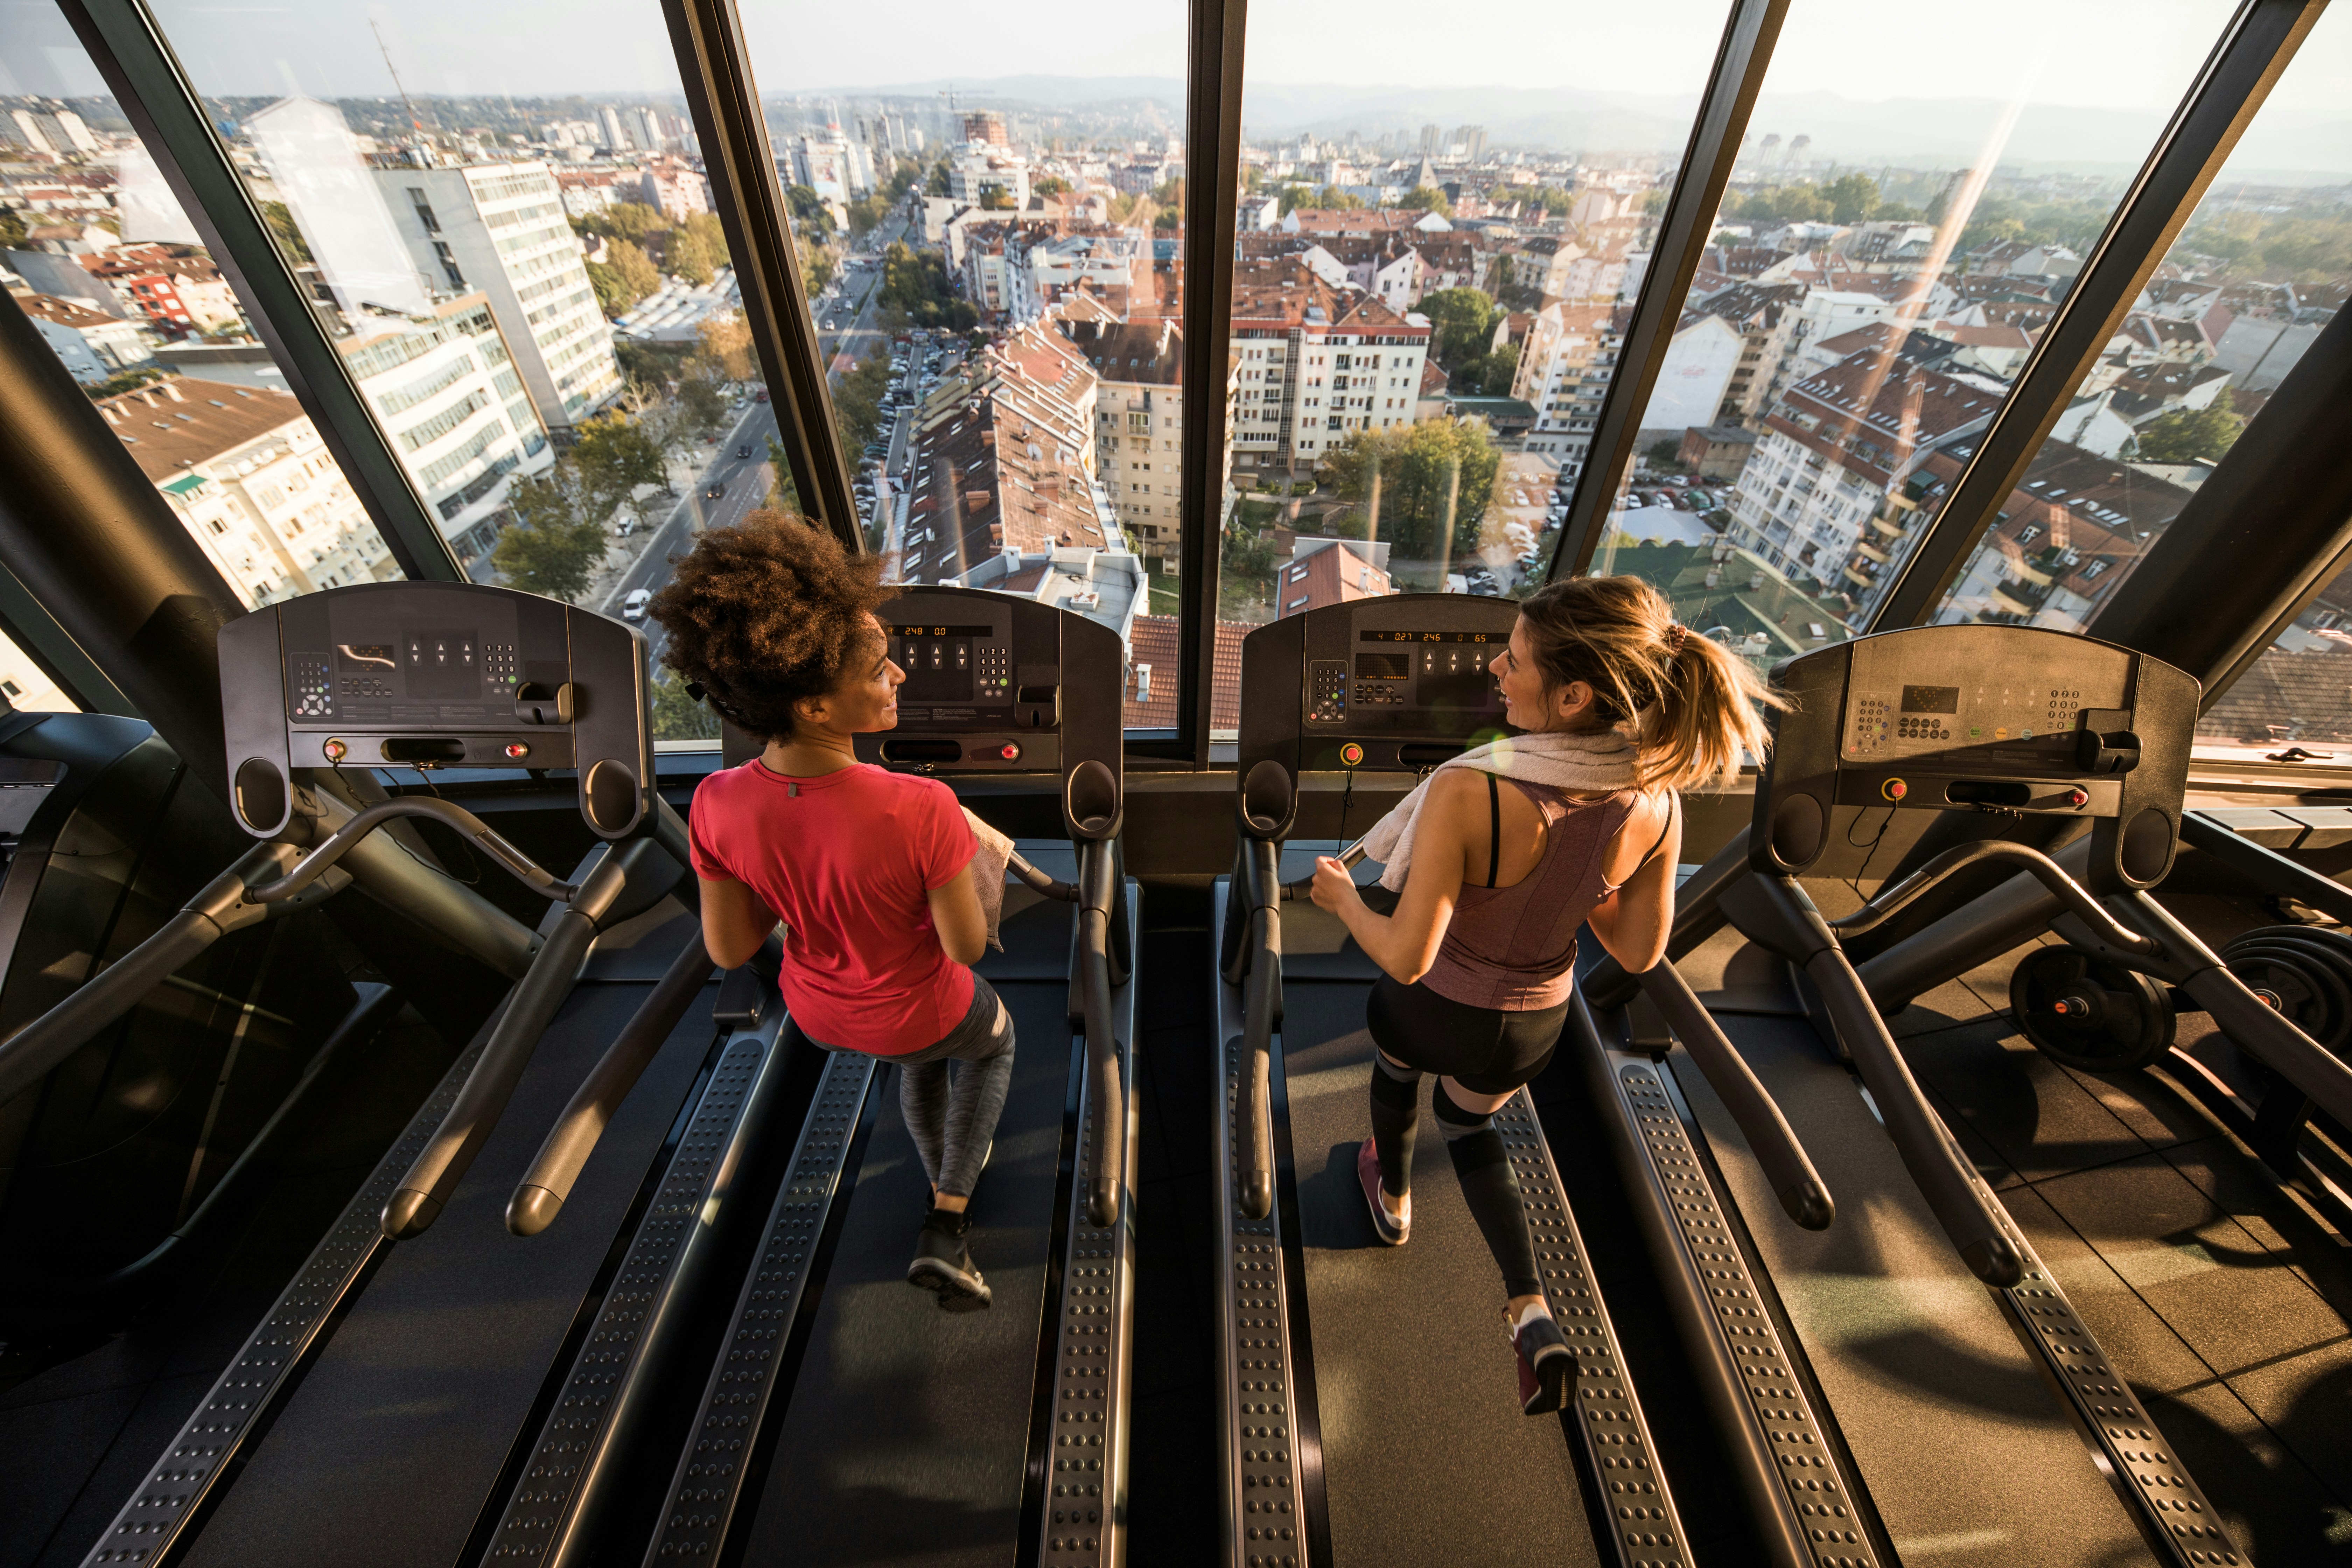 Two women run on treadmills in front a window showing a view of a city. 